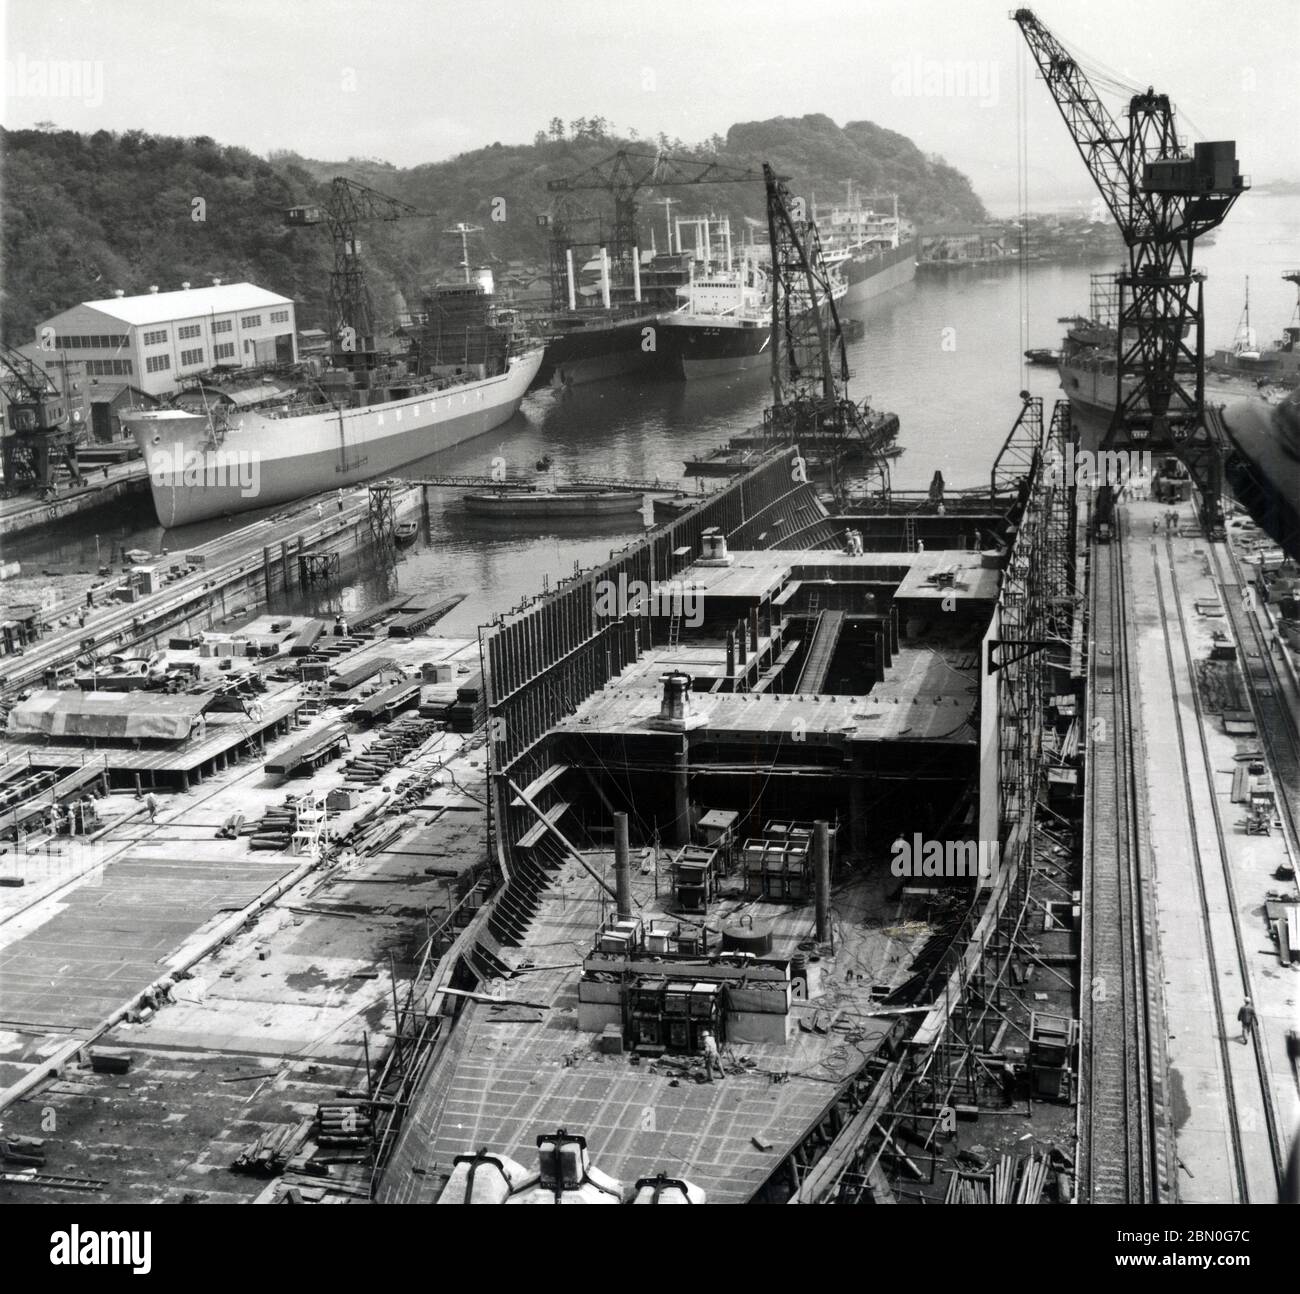 [ 1960s Japan - Japanese Shipyard ] —   Ship construction at the Uraga Dock Company (浦賀船渠株式会社) in Uraga (浦賀), a subdivision of Yokosuka in Kanagawa Prefecture, Japan, ca. 1960 (Showa 35).  The Uraga Dock Company was founded in 1869 (Meiji 2) by Admiral Enomoto Takeaki (榎本 武揚, 1836–1908), one of the founders of the Imperial Japanese Navy.  By 1919 (Taisho 8), it was considered one of the largest and best equipped private shipyards in the world.  20th century gelatin silver print. Stock Photo